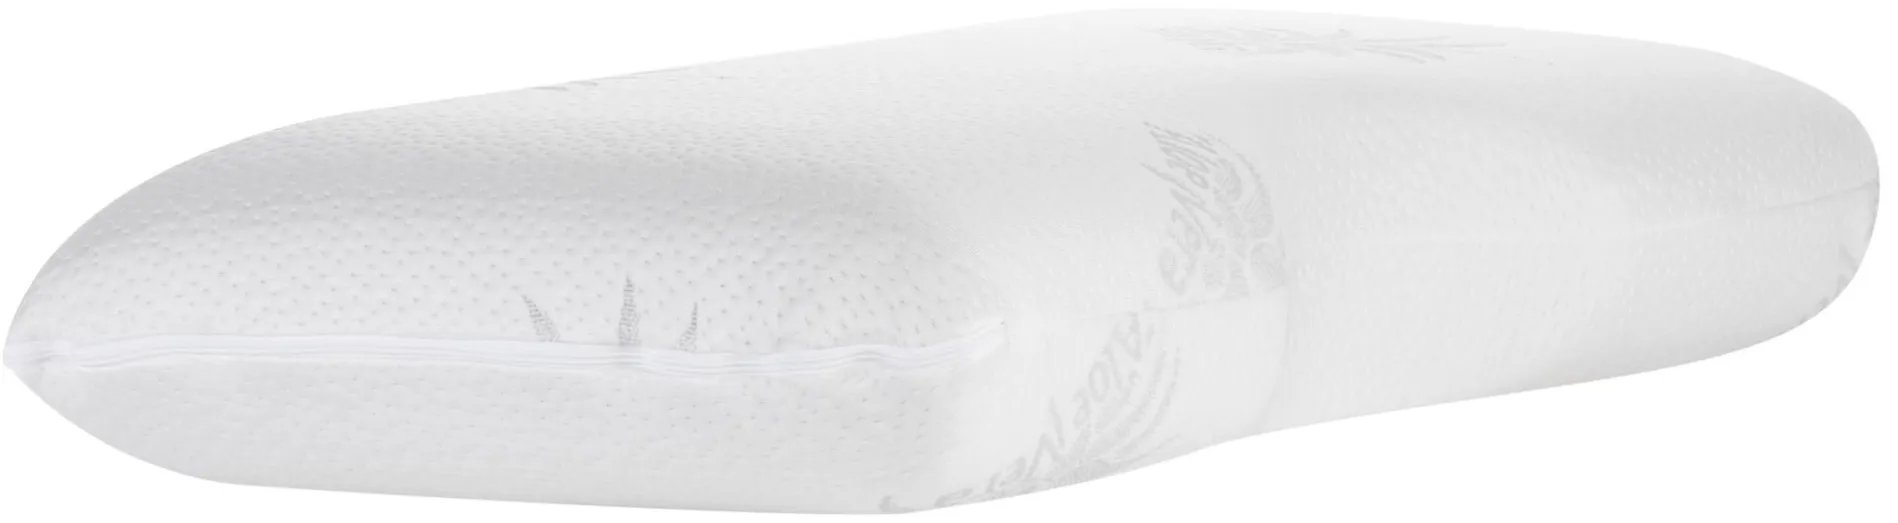 Serenity Contour Pillow (Single) in White by Mlily USA,